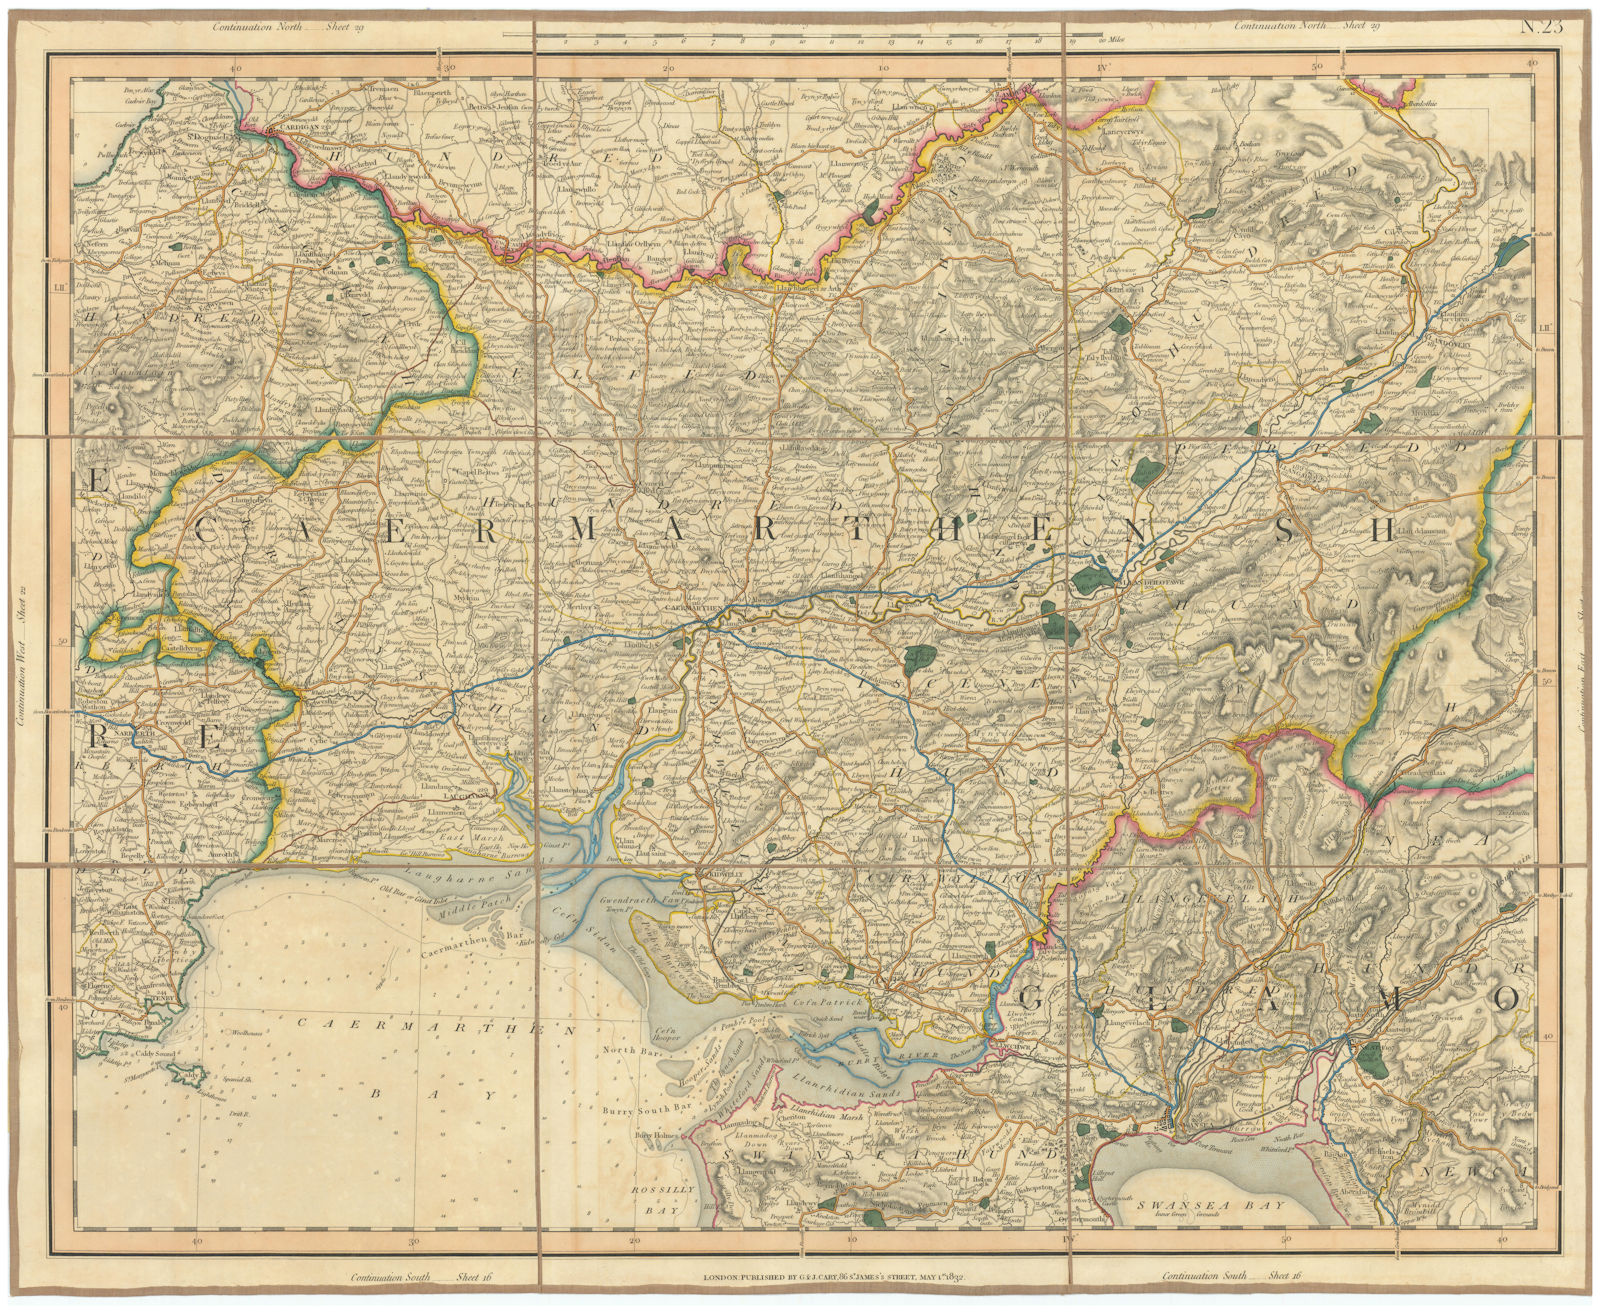 Associate Product CARMARTHENSHIRE & GOWER PENINSULA. West Glamorganshire. CARY 1832 old map